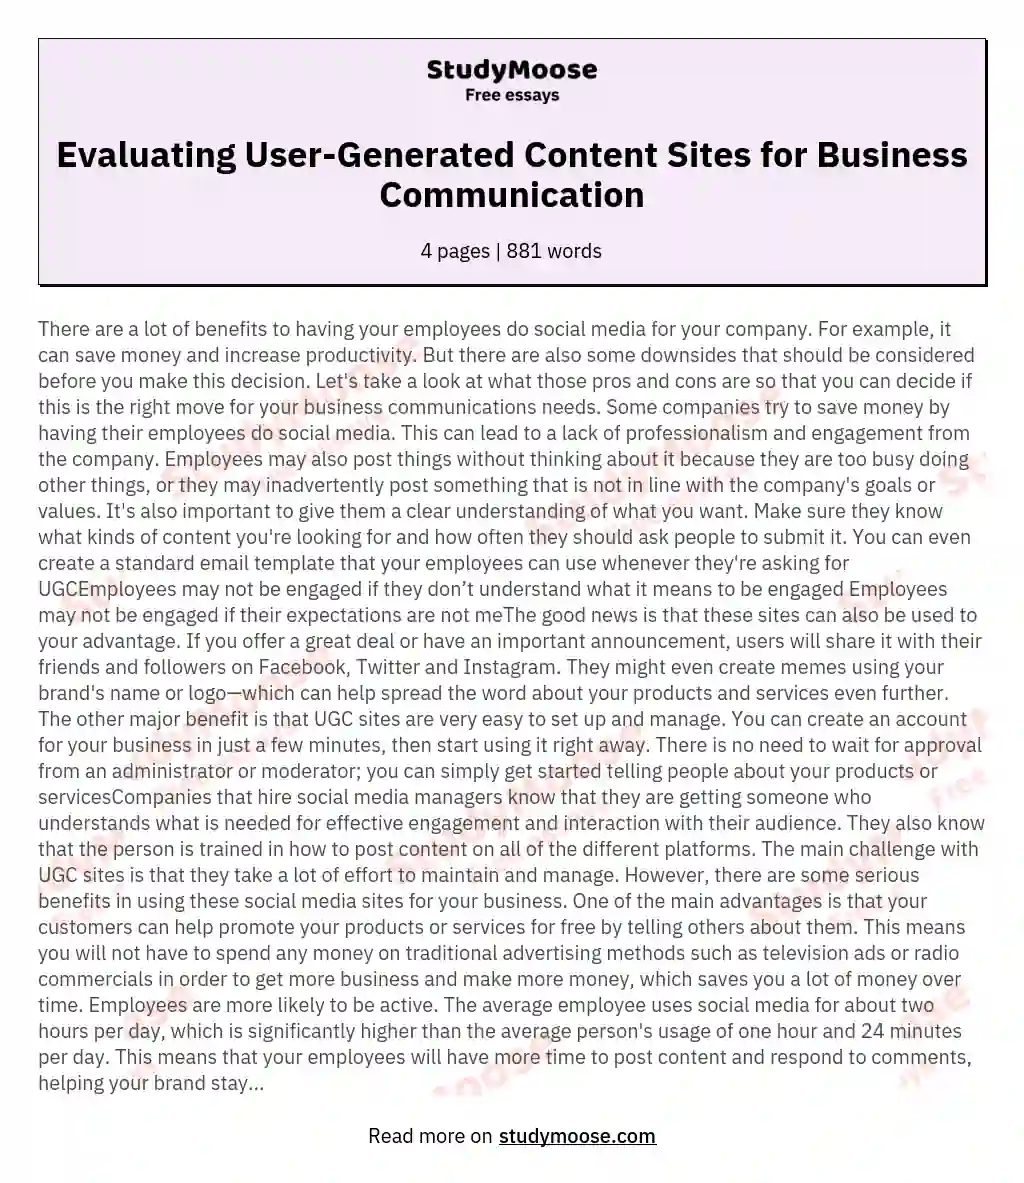 Evaluating User-Generated Content Sites for Business Communication essay